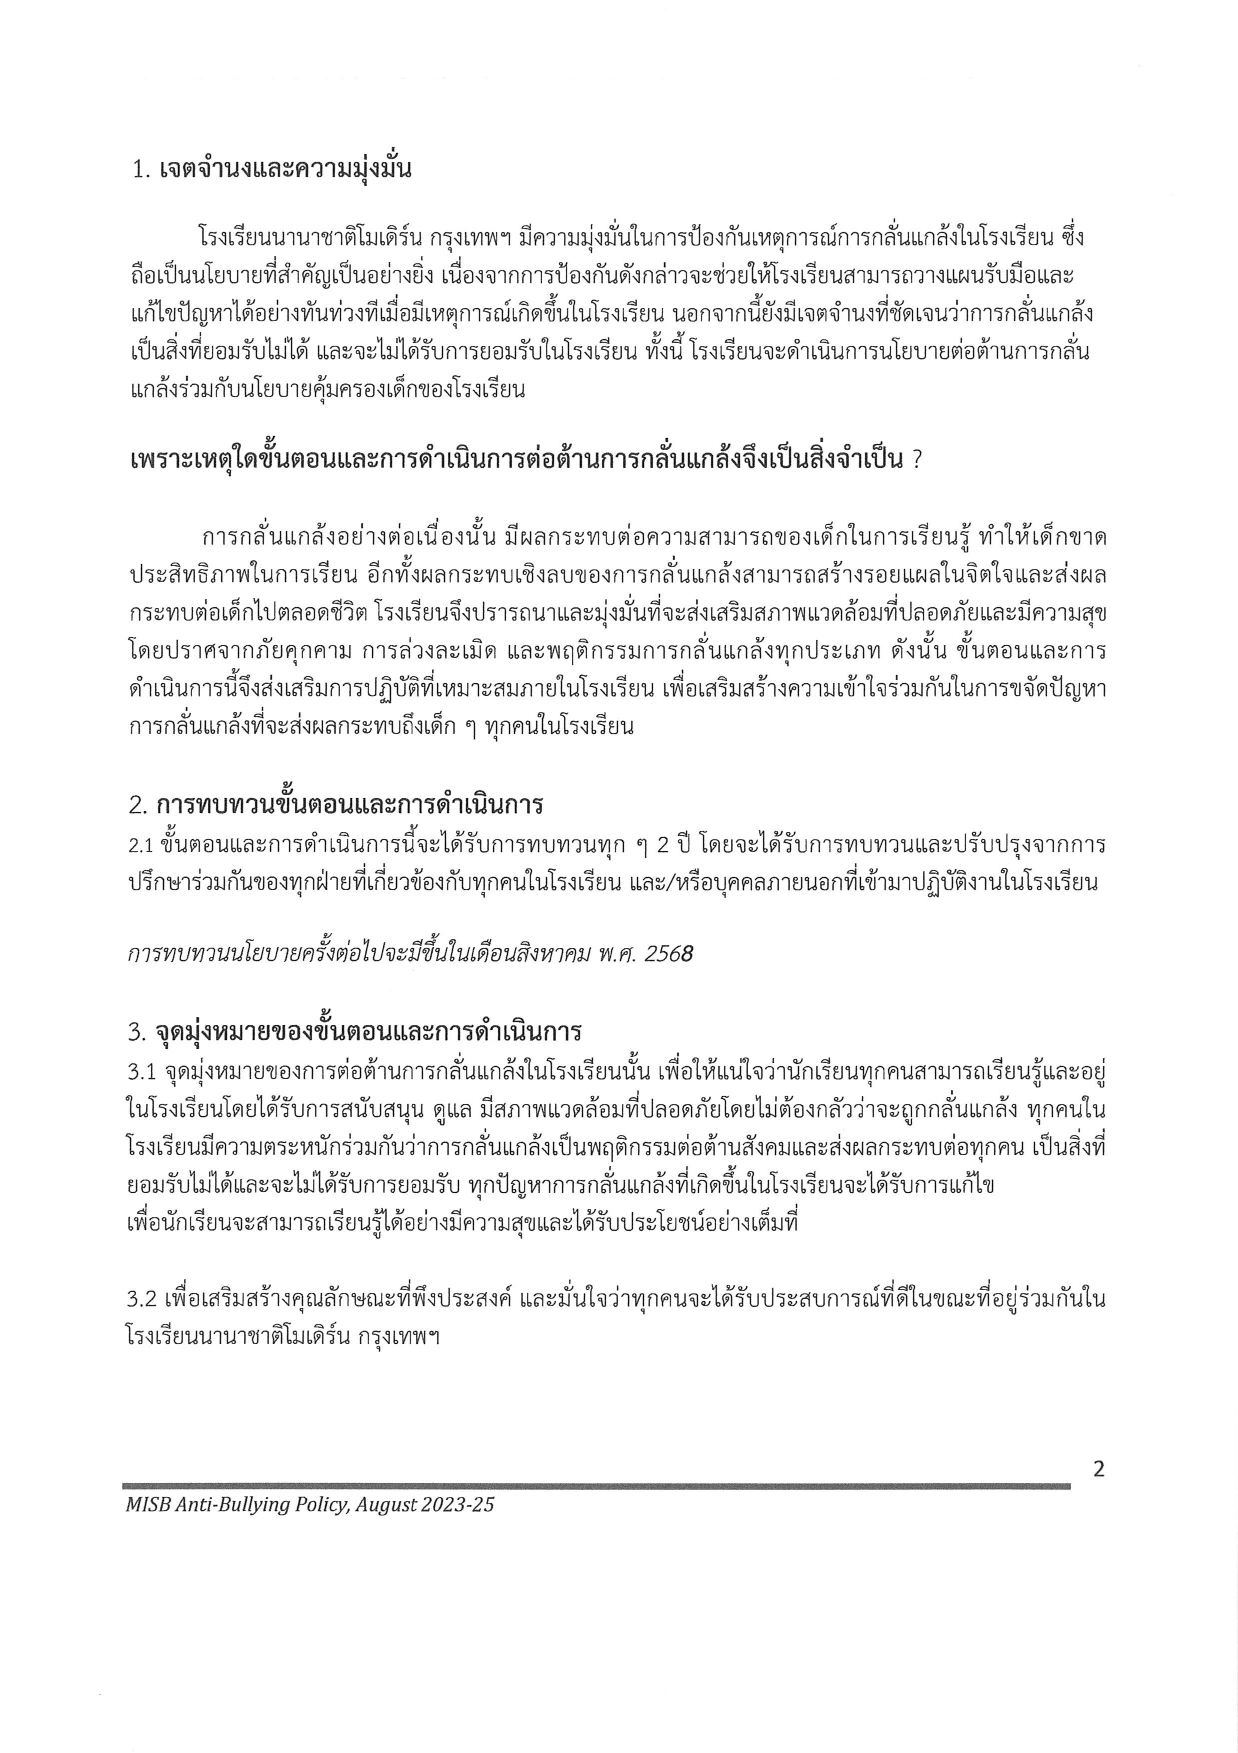 Anti Bullying Policy 2023 2025 Thai page 0004